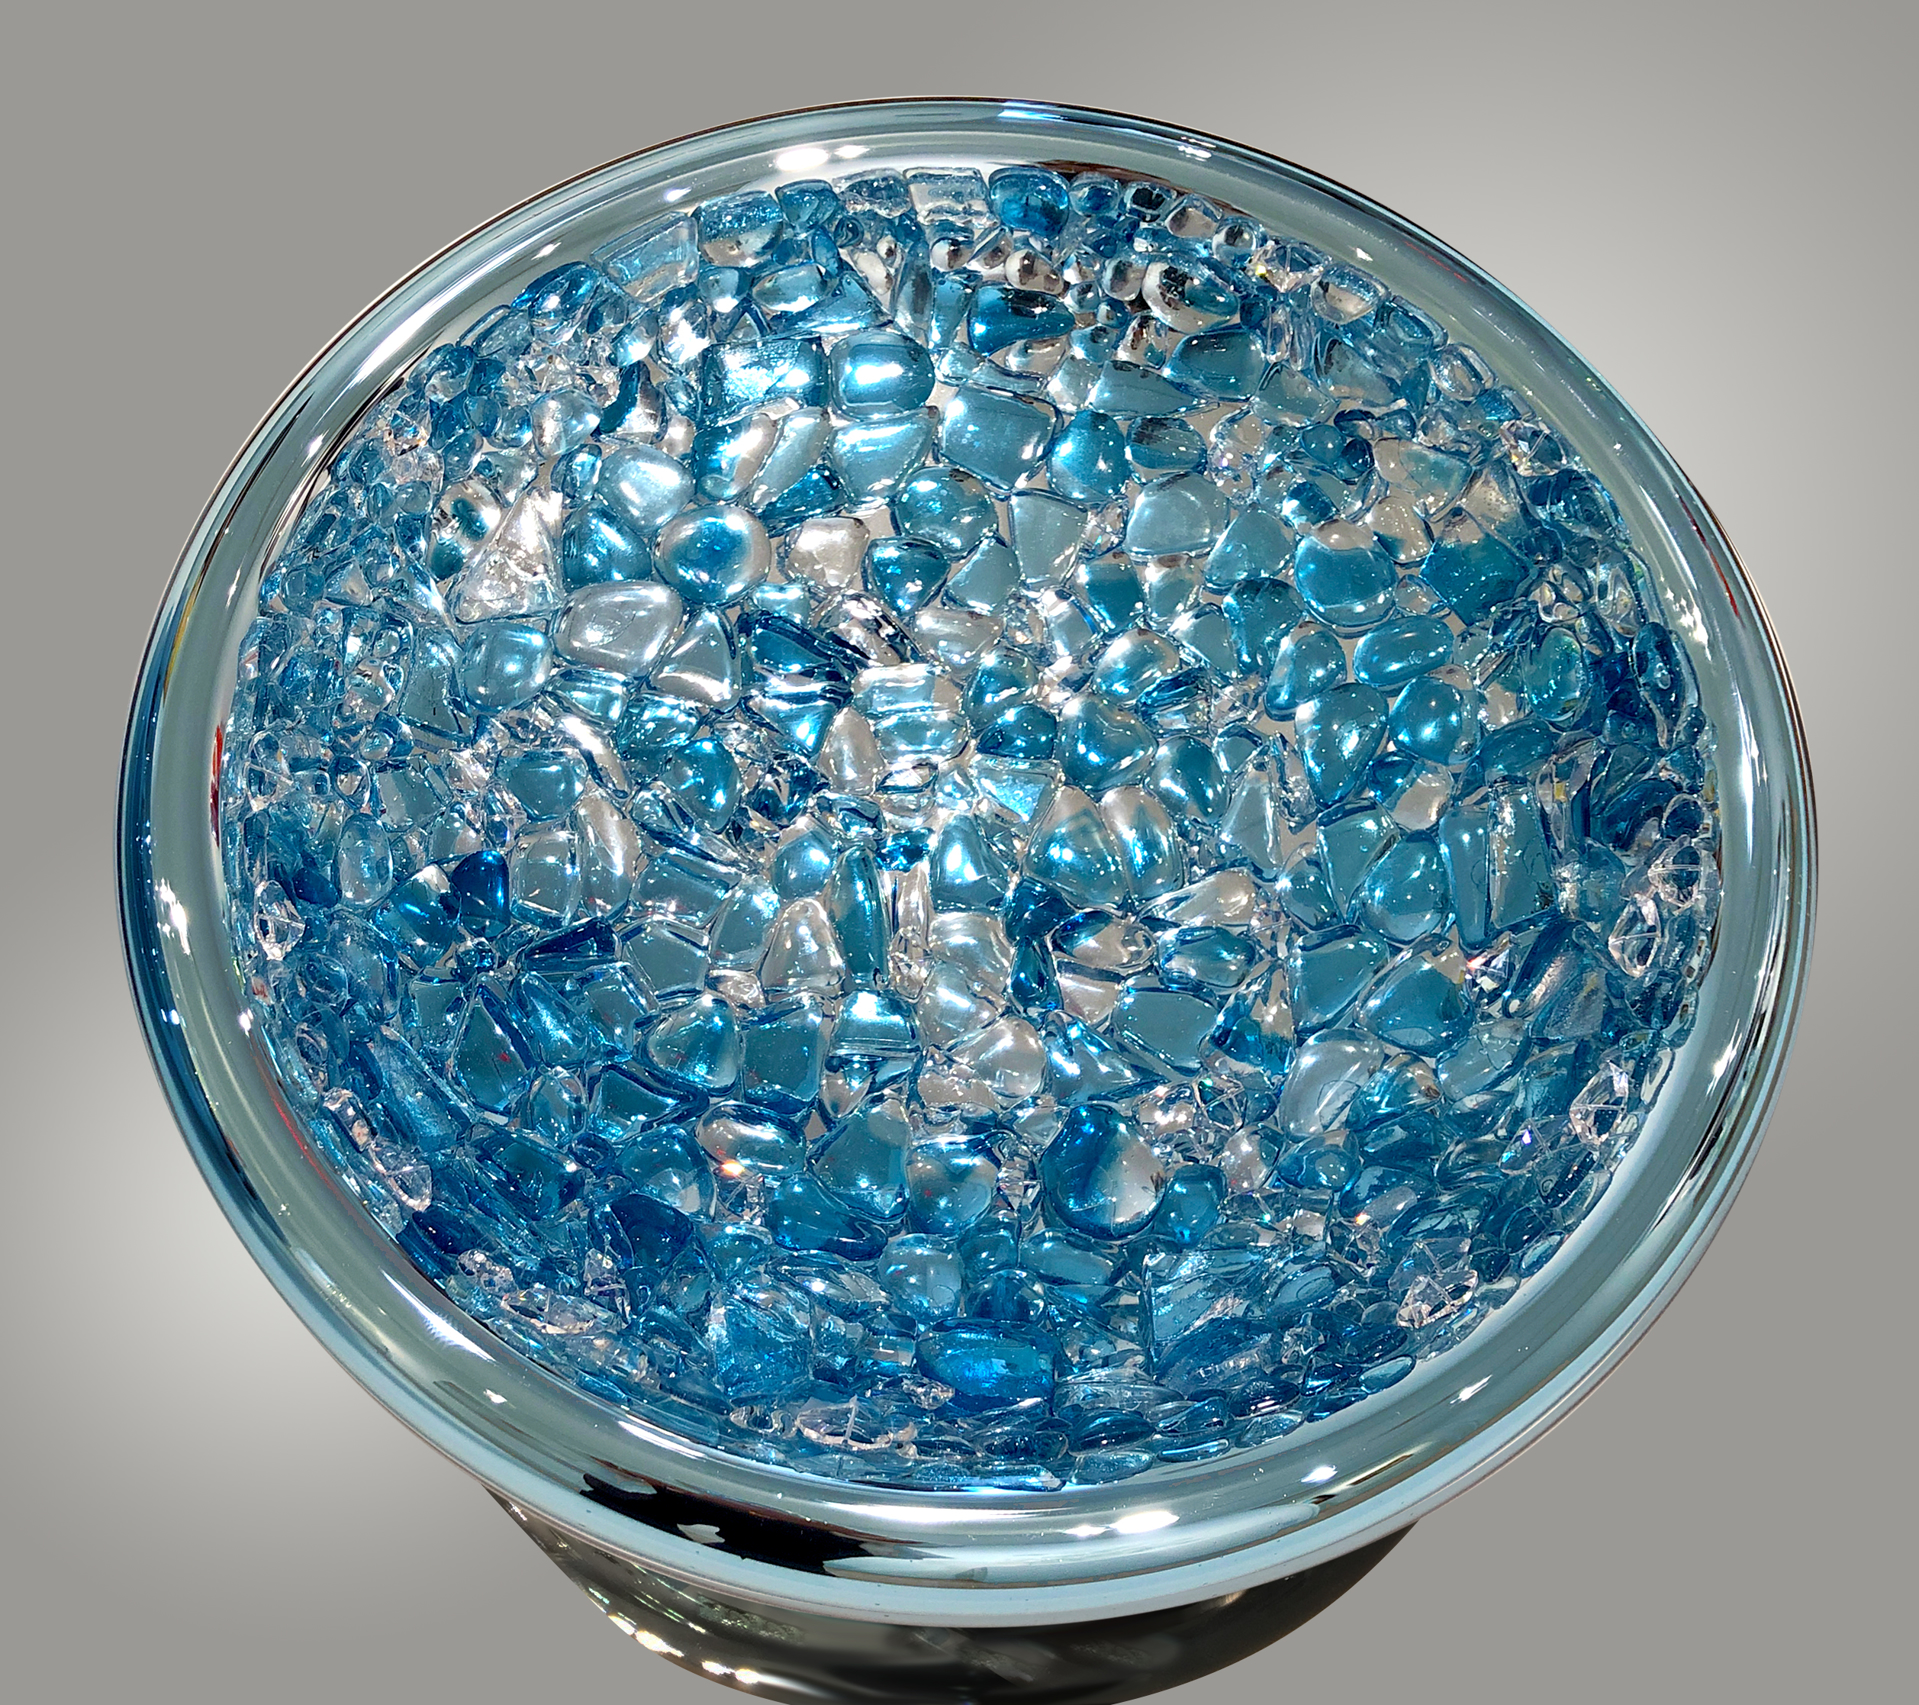 Large Turquoise Diamond Dust Bowl by Abby Modell